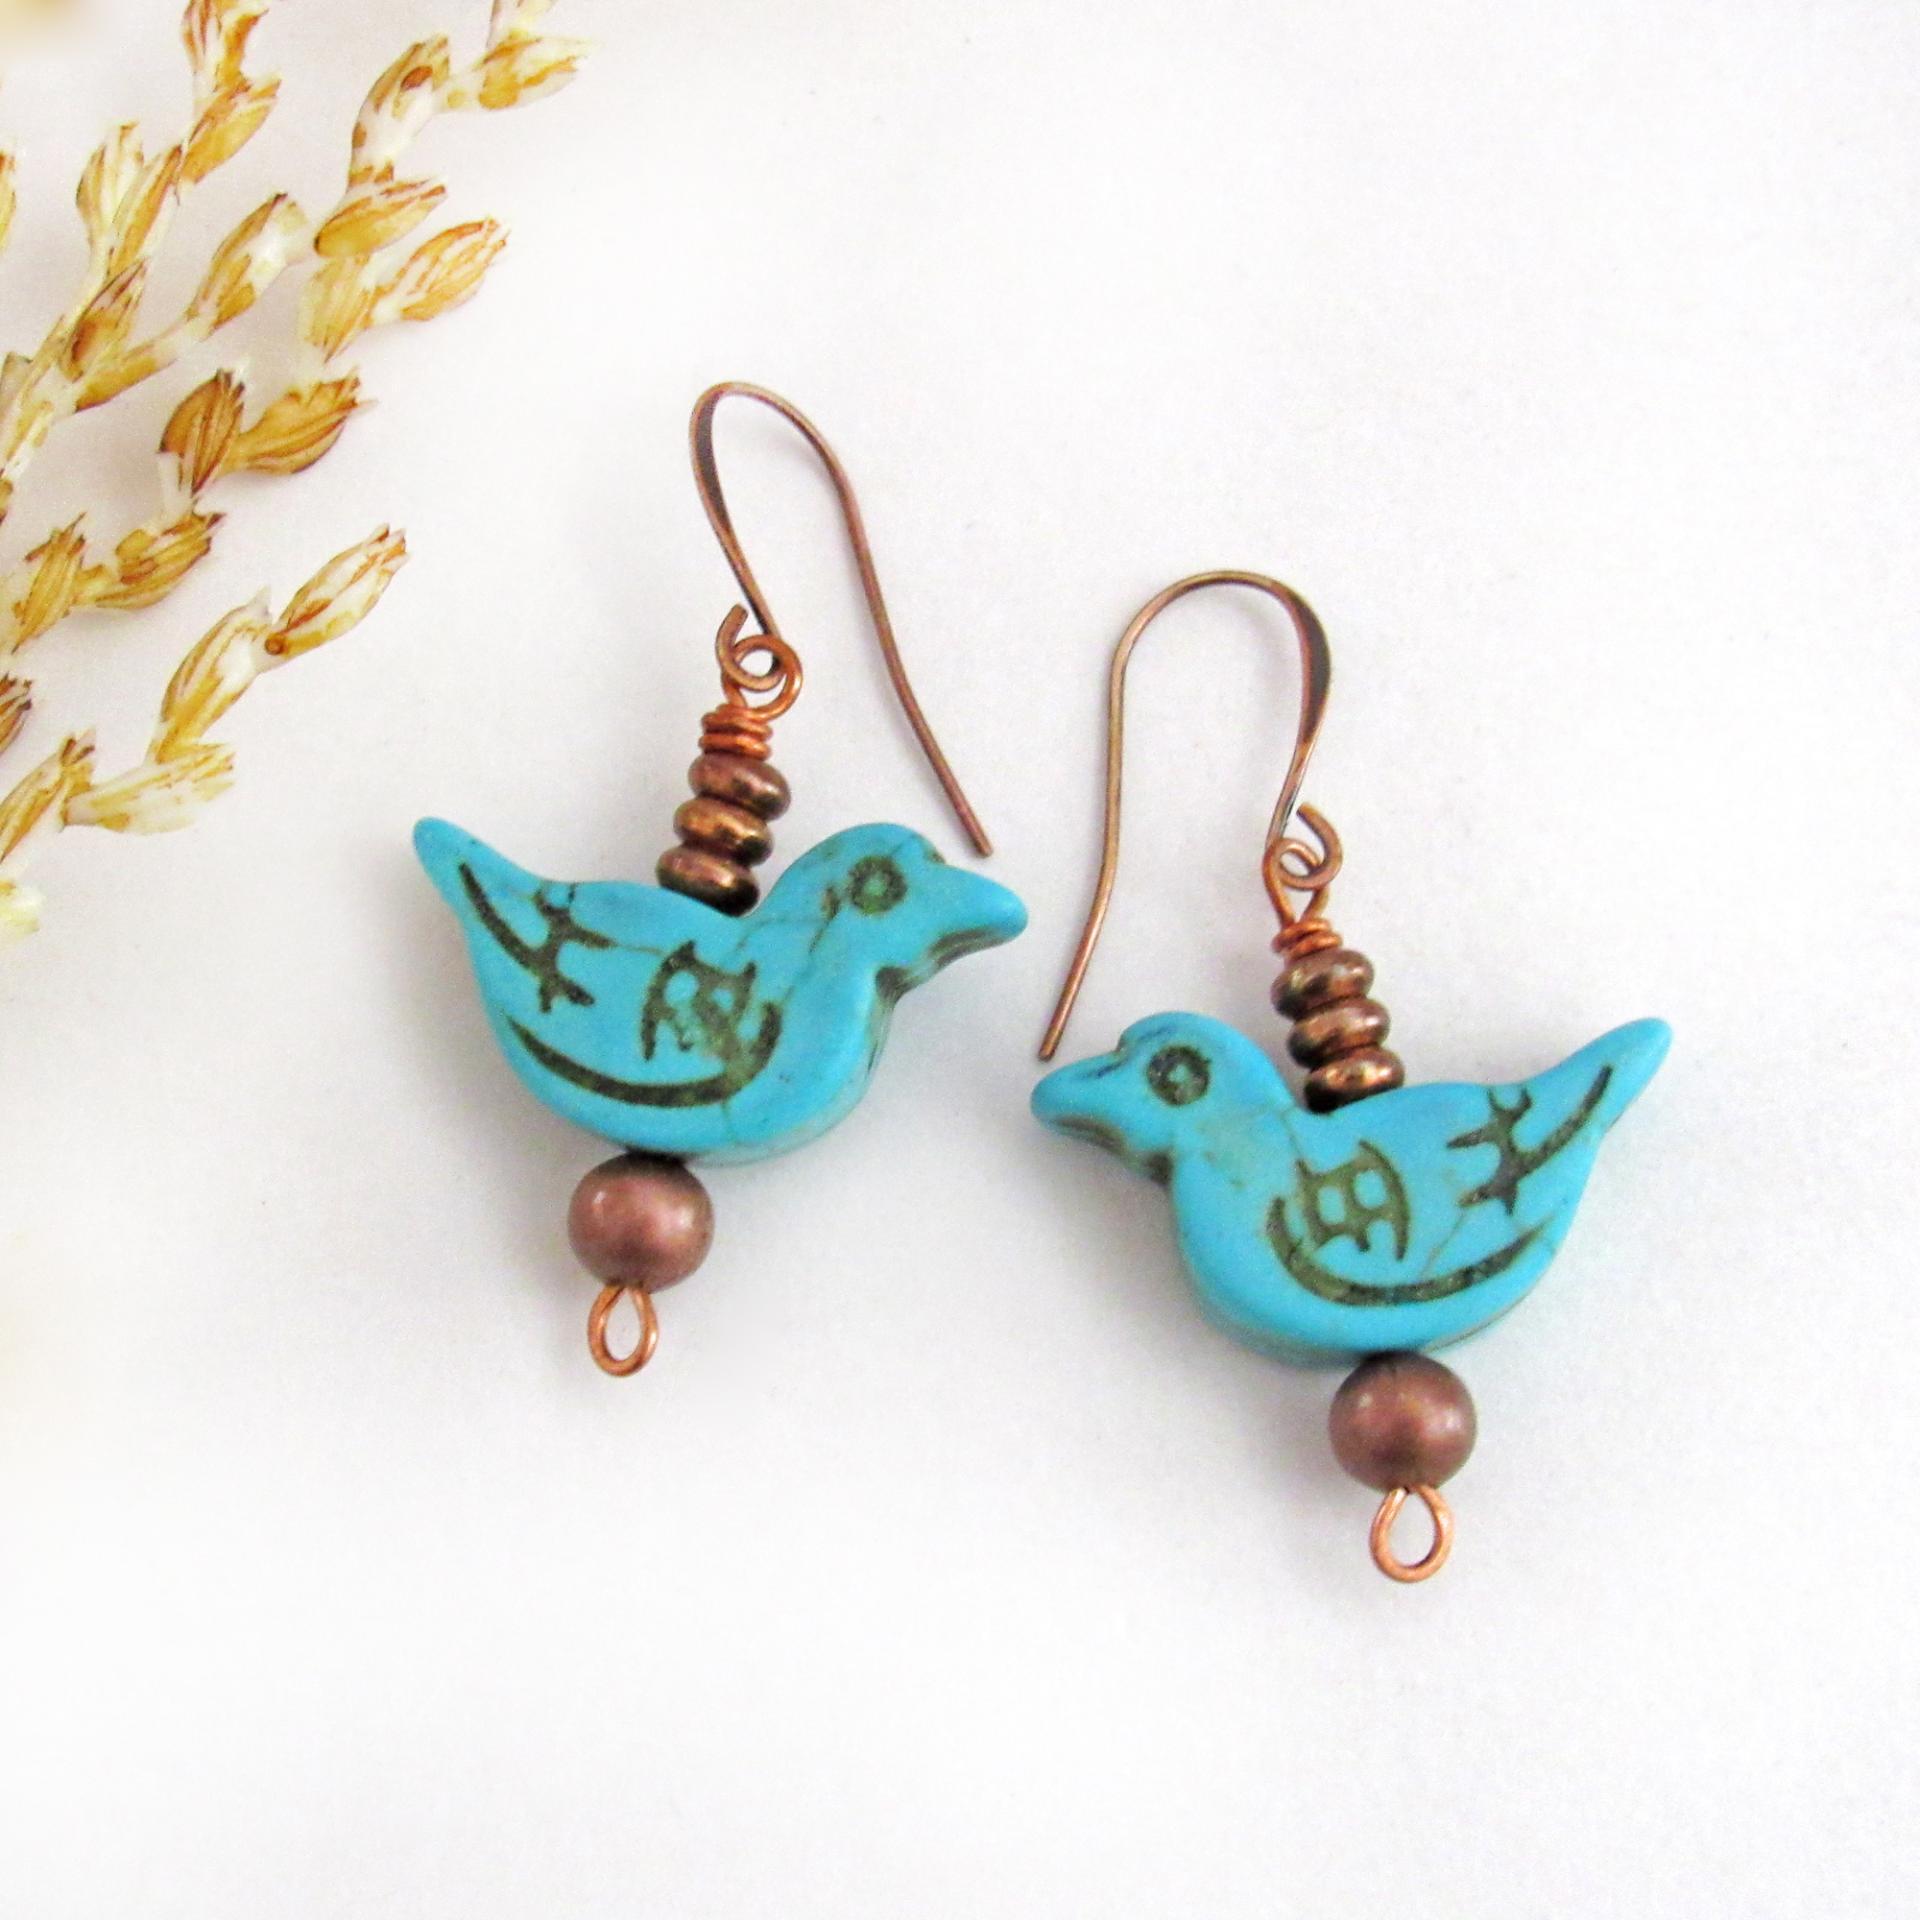 Blue Bird Turquoise Magnesite Earrings - Cute Earthy Nature Jewelry Gifts for Birdwatchers & Bird Lovers 